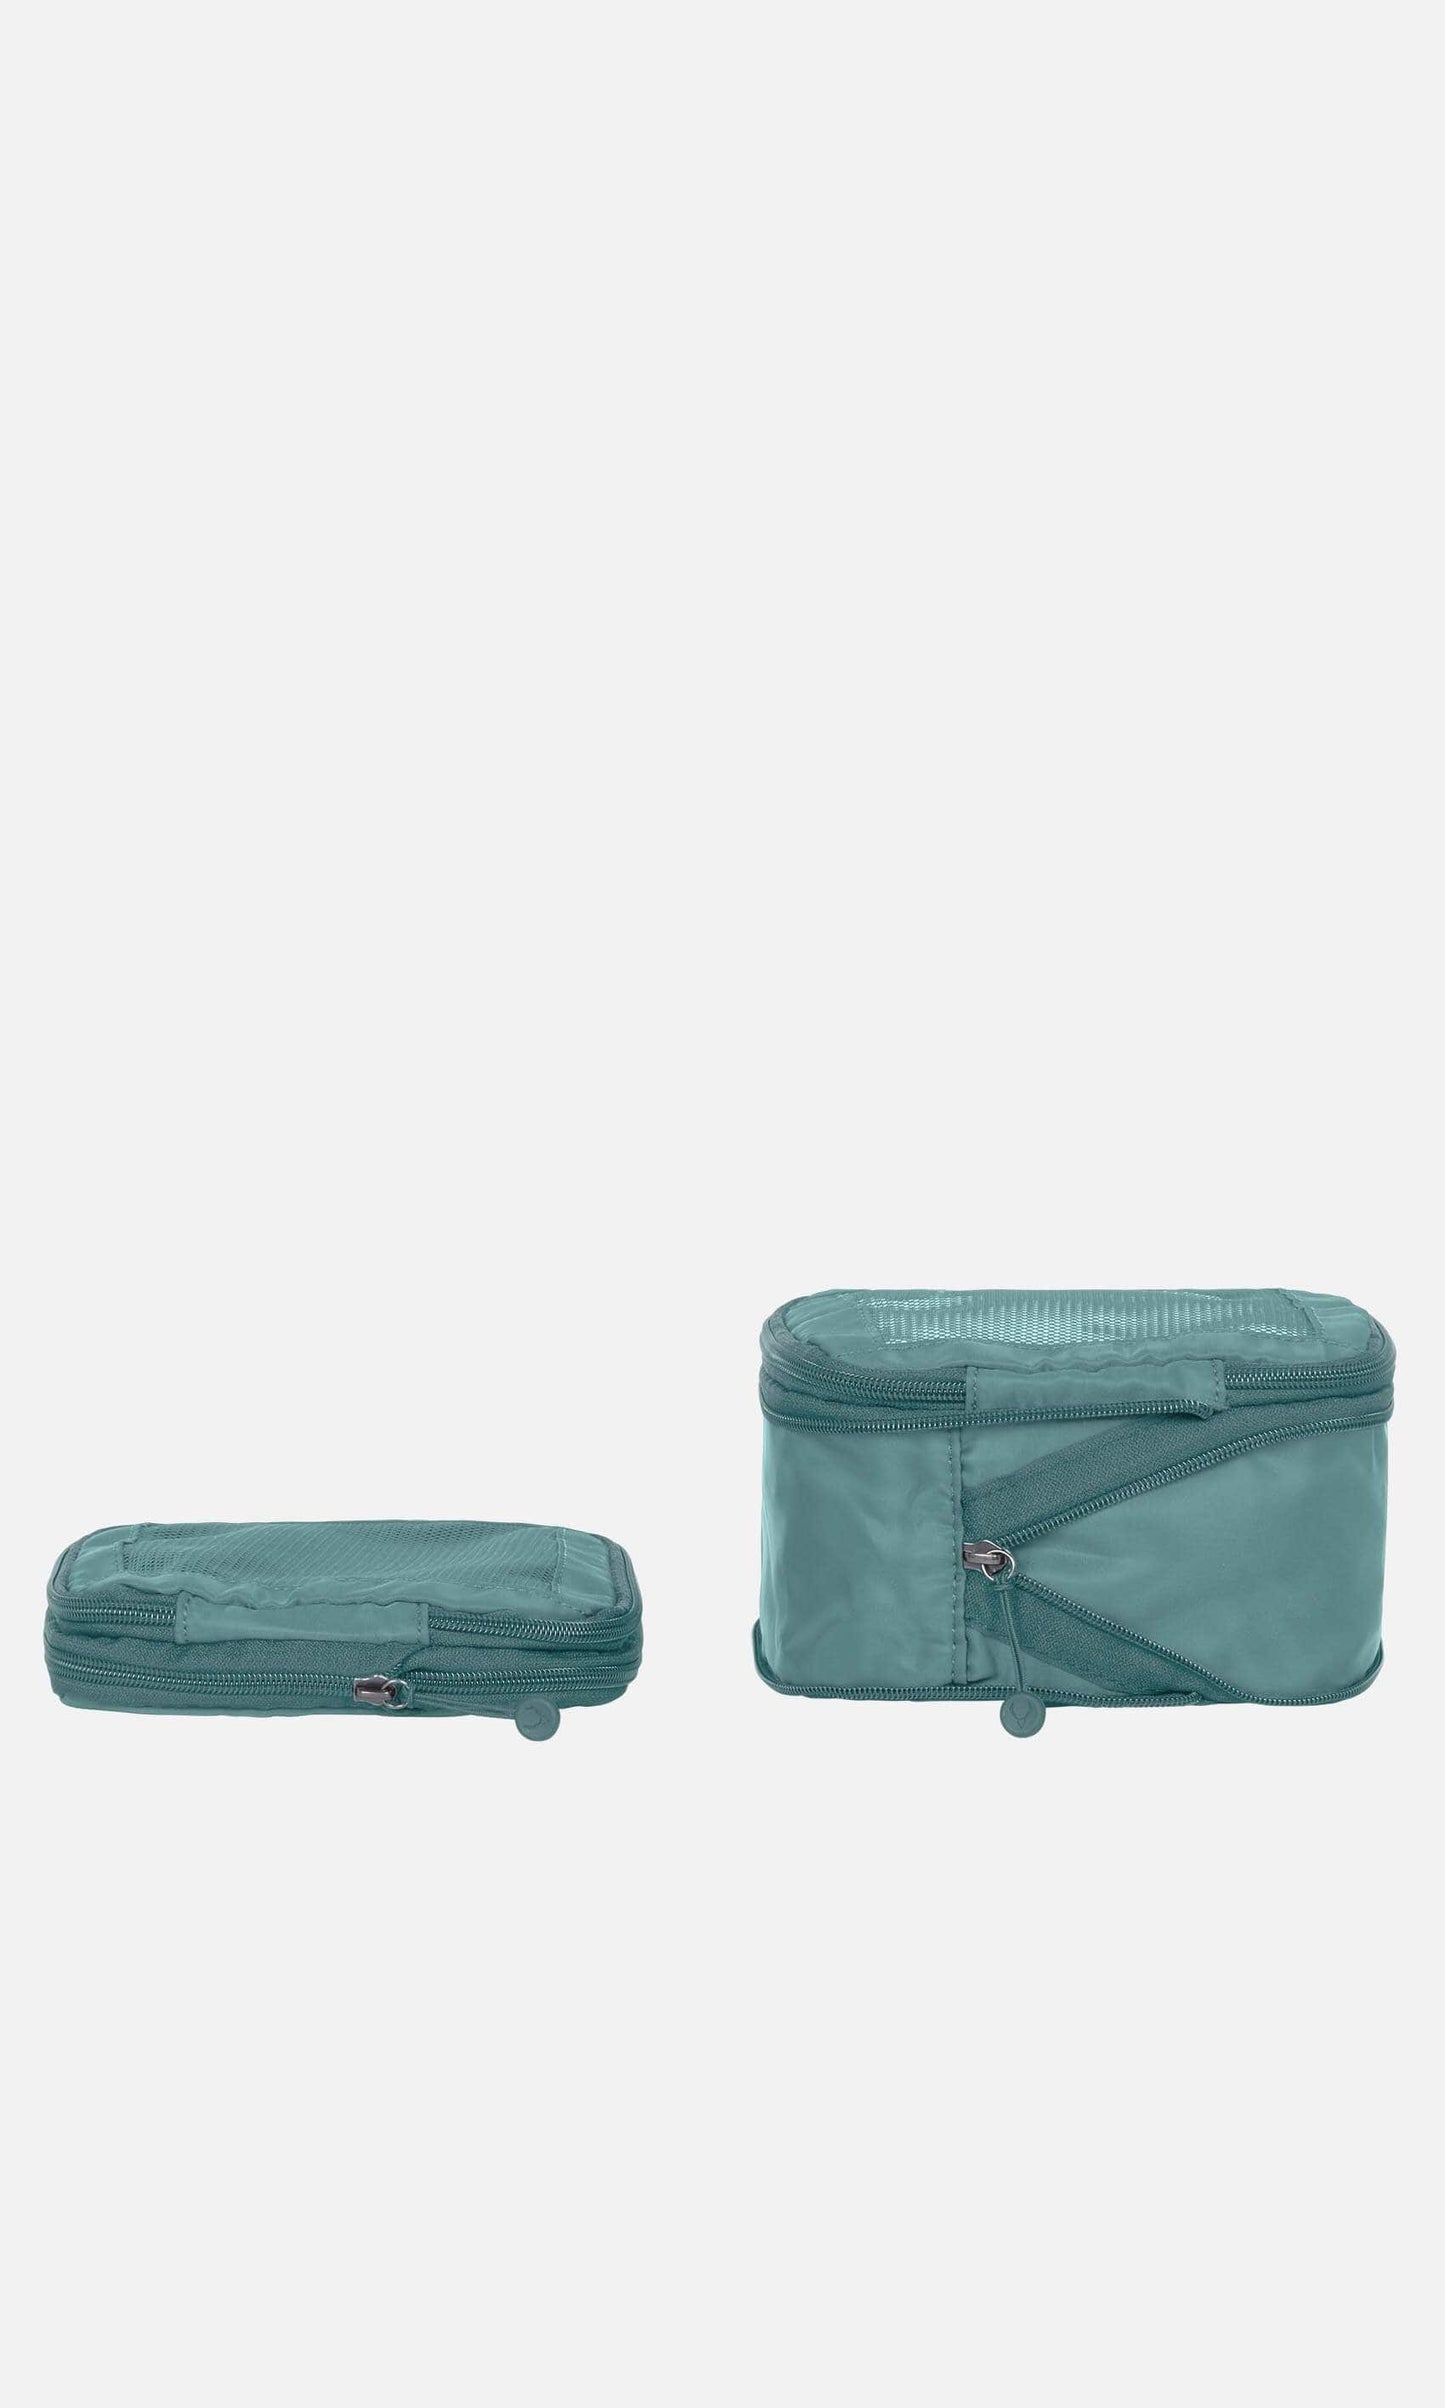 Antler Luggage -  Chelsea 4 packing cubes in mineral - Accessories Chelsea 4 Packing Cubes Mineral (Blue) | Travel Accessories | Antler UK